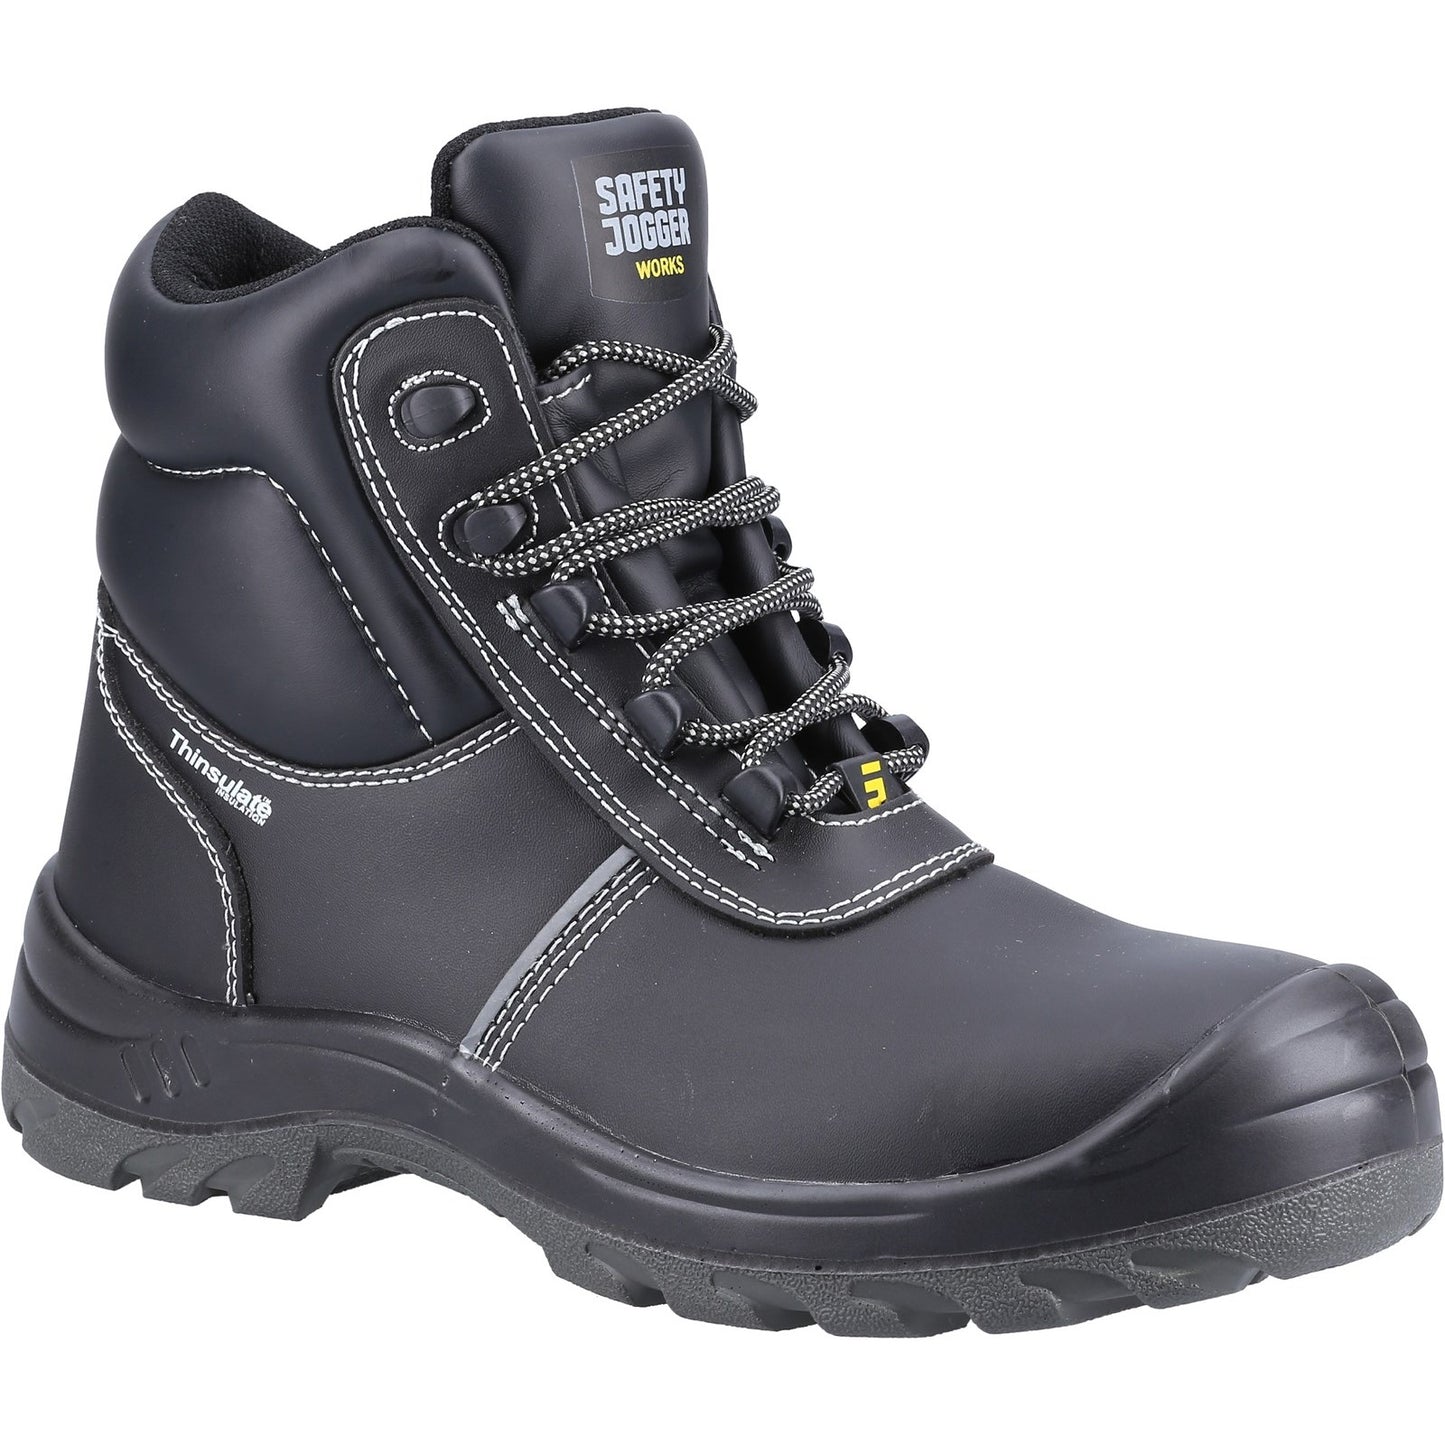 Aras S3 Safety Boots, Safety Jogger